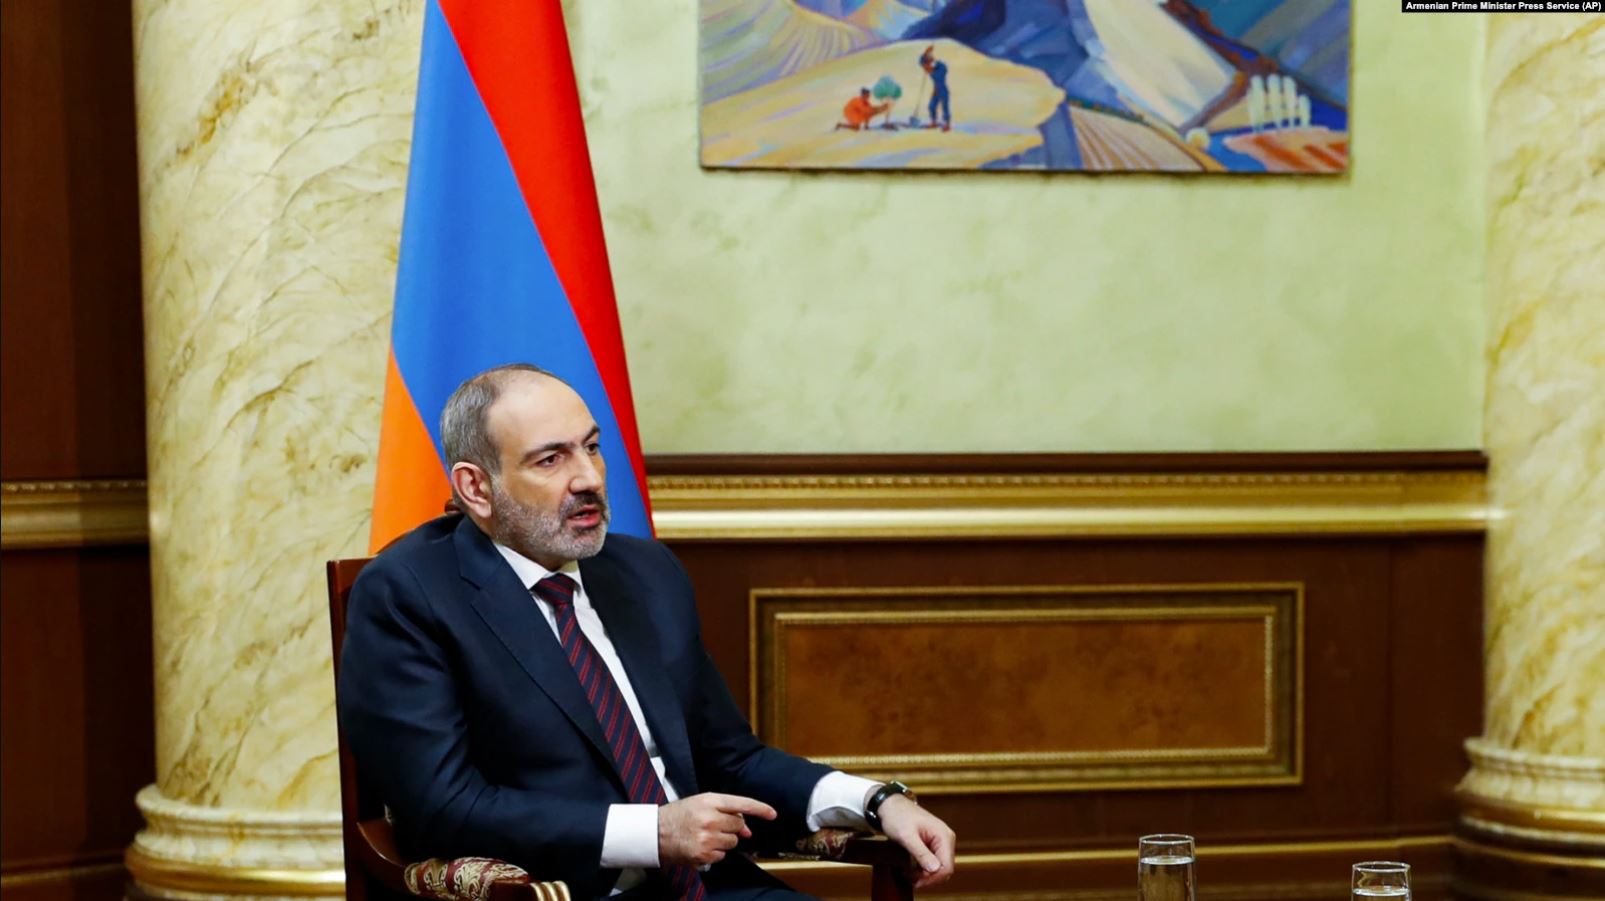 Pashinyan’s ‘News Conference’ Boycotted By Media